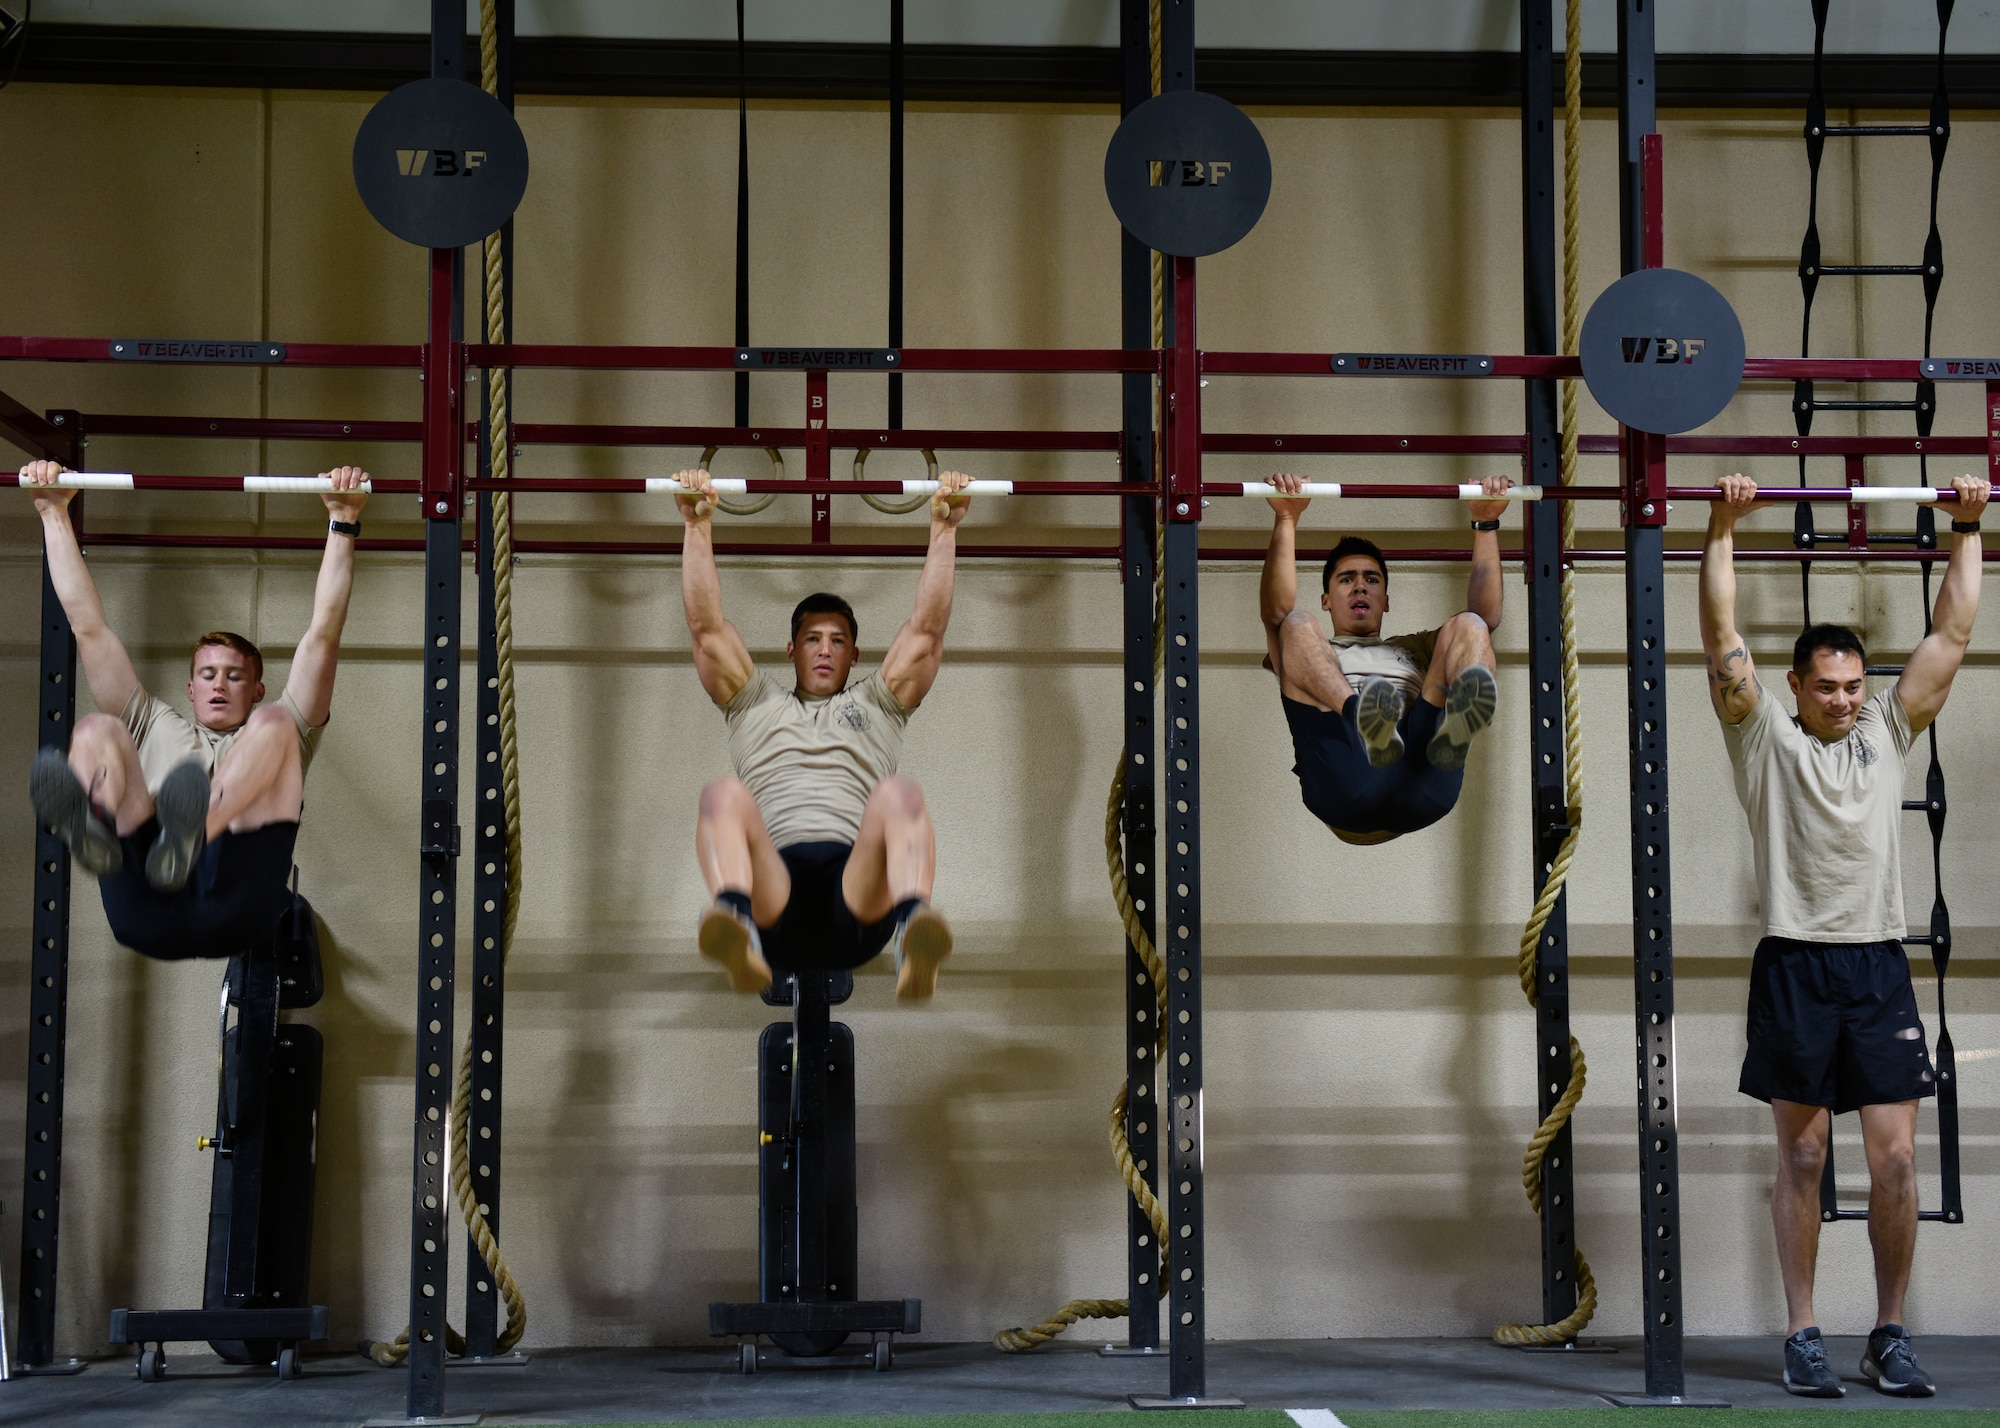 Participants in the Maltz Challenge perform the knees to elbows exercise at Kirtland Air Force Base, N.M., March 15, 2019. The Maltz Challenge is a timed, team competition that consists of a 400-meter run, 50 pull-ups, 100 yard fireman’s carry, 50 dips, 100 push-ups, 50 knees-to-elbows, 100 sit-ups and another 400-meter run. (U.S. Air Force photo by Airman 1st Class Austin J. Prisbrey)